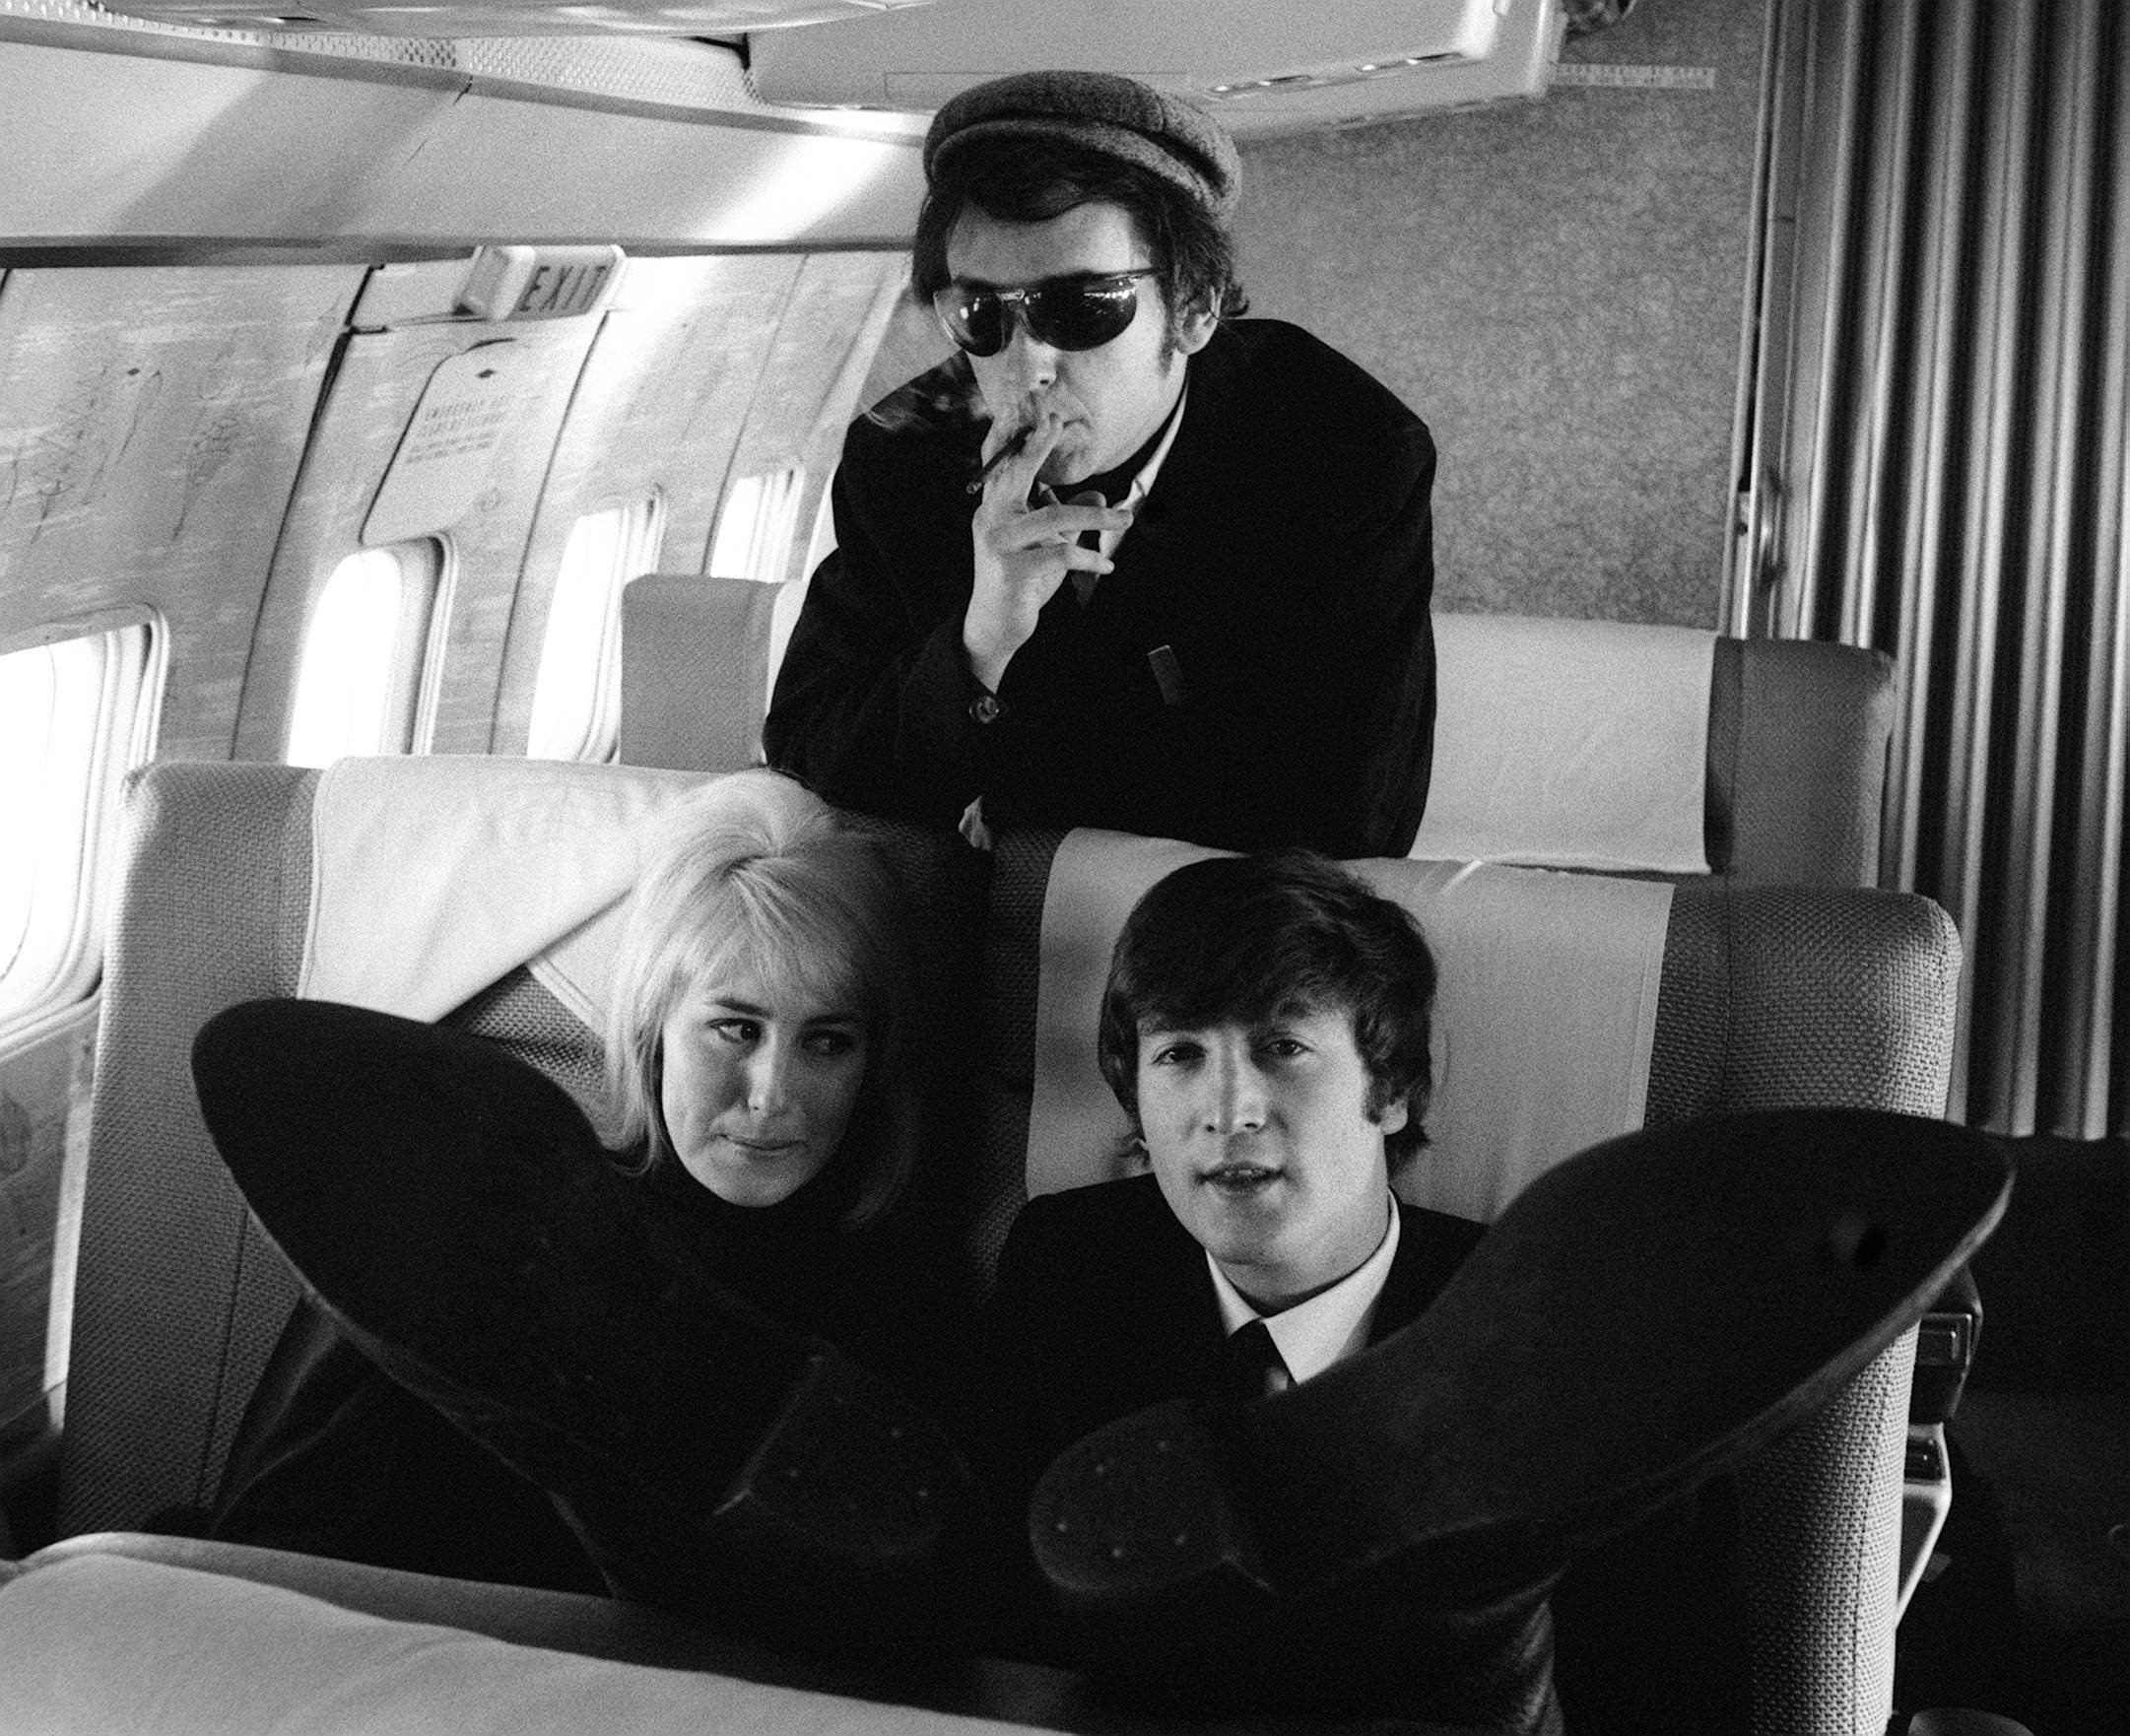 Phil Spector, John Lennon, and Cynthia Lennon in black-and-white